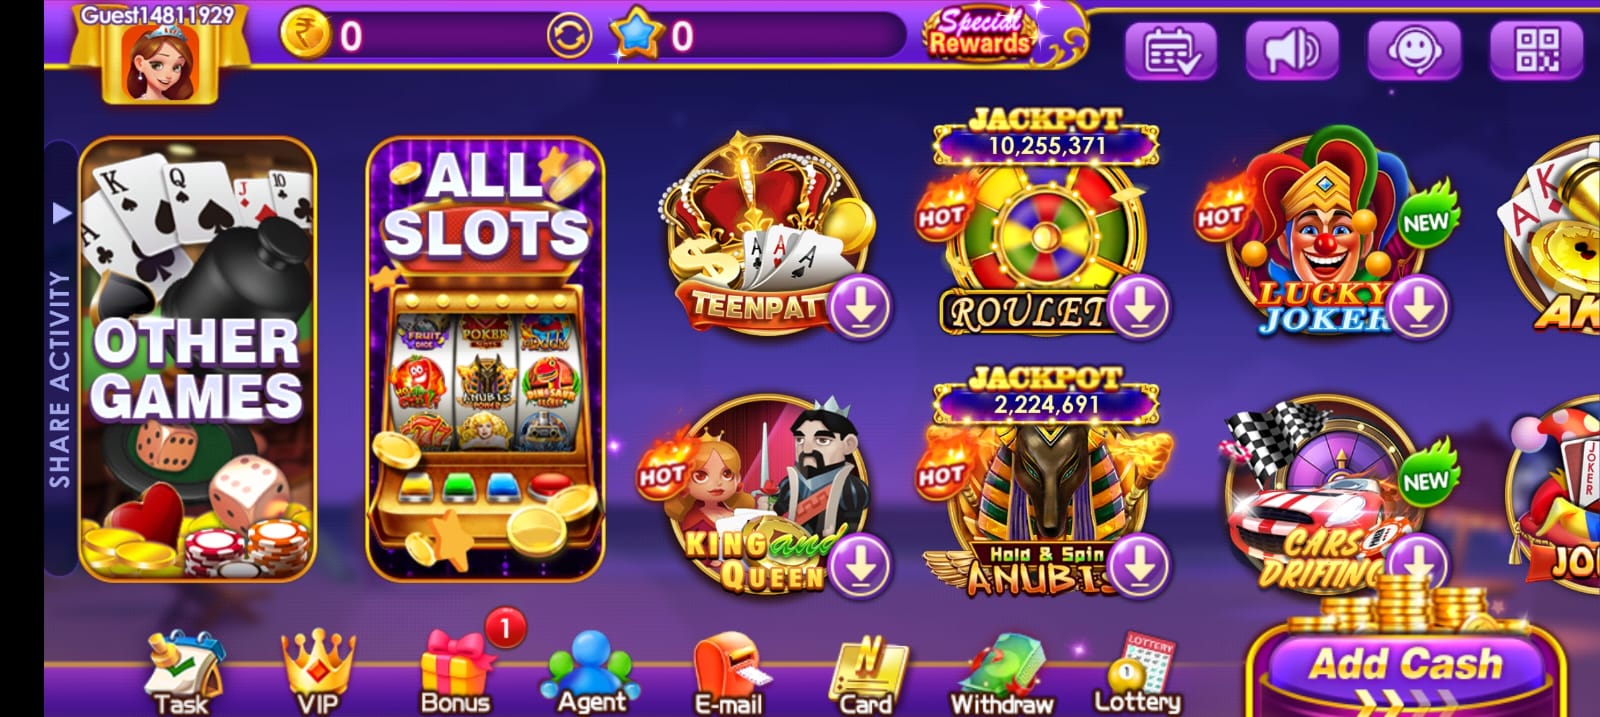 Available All Games on Mega Slots App